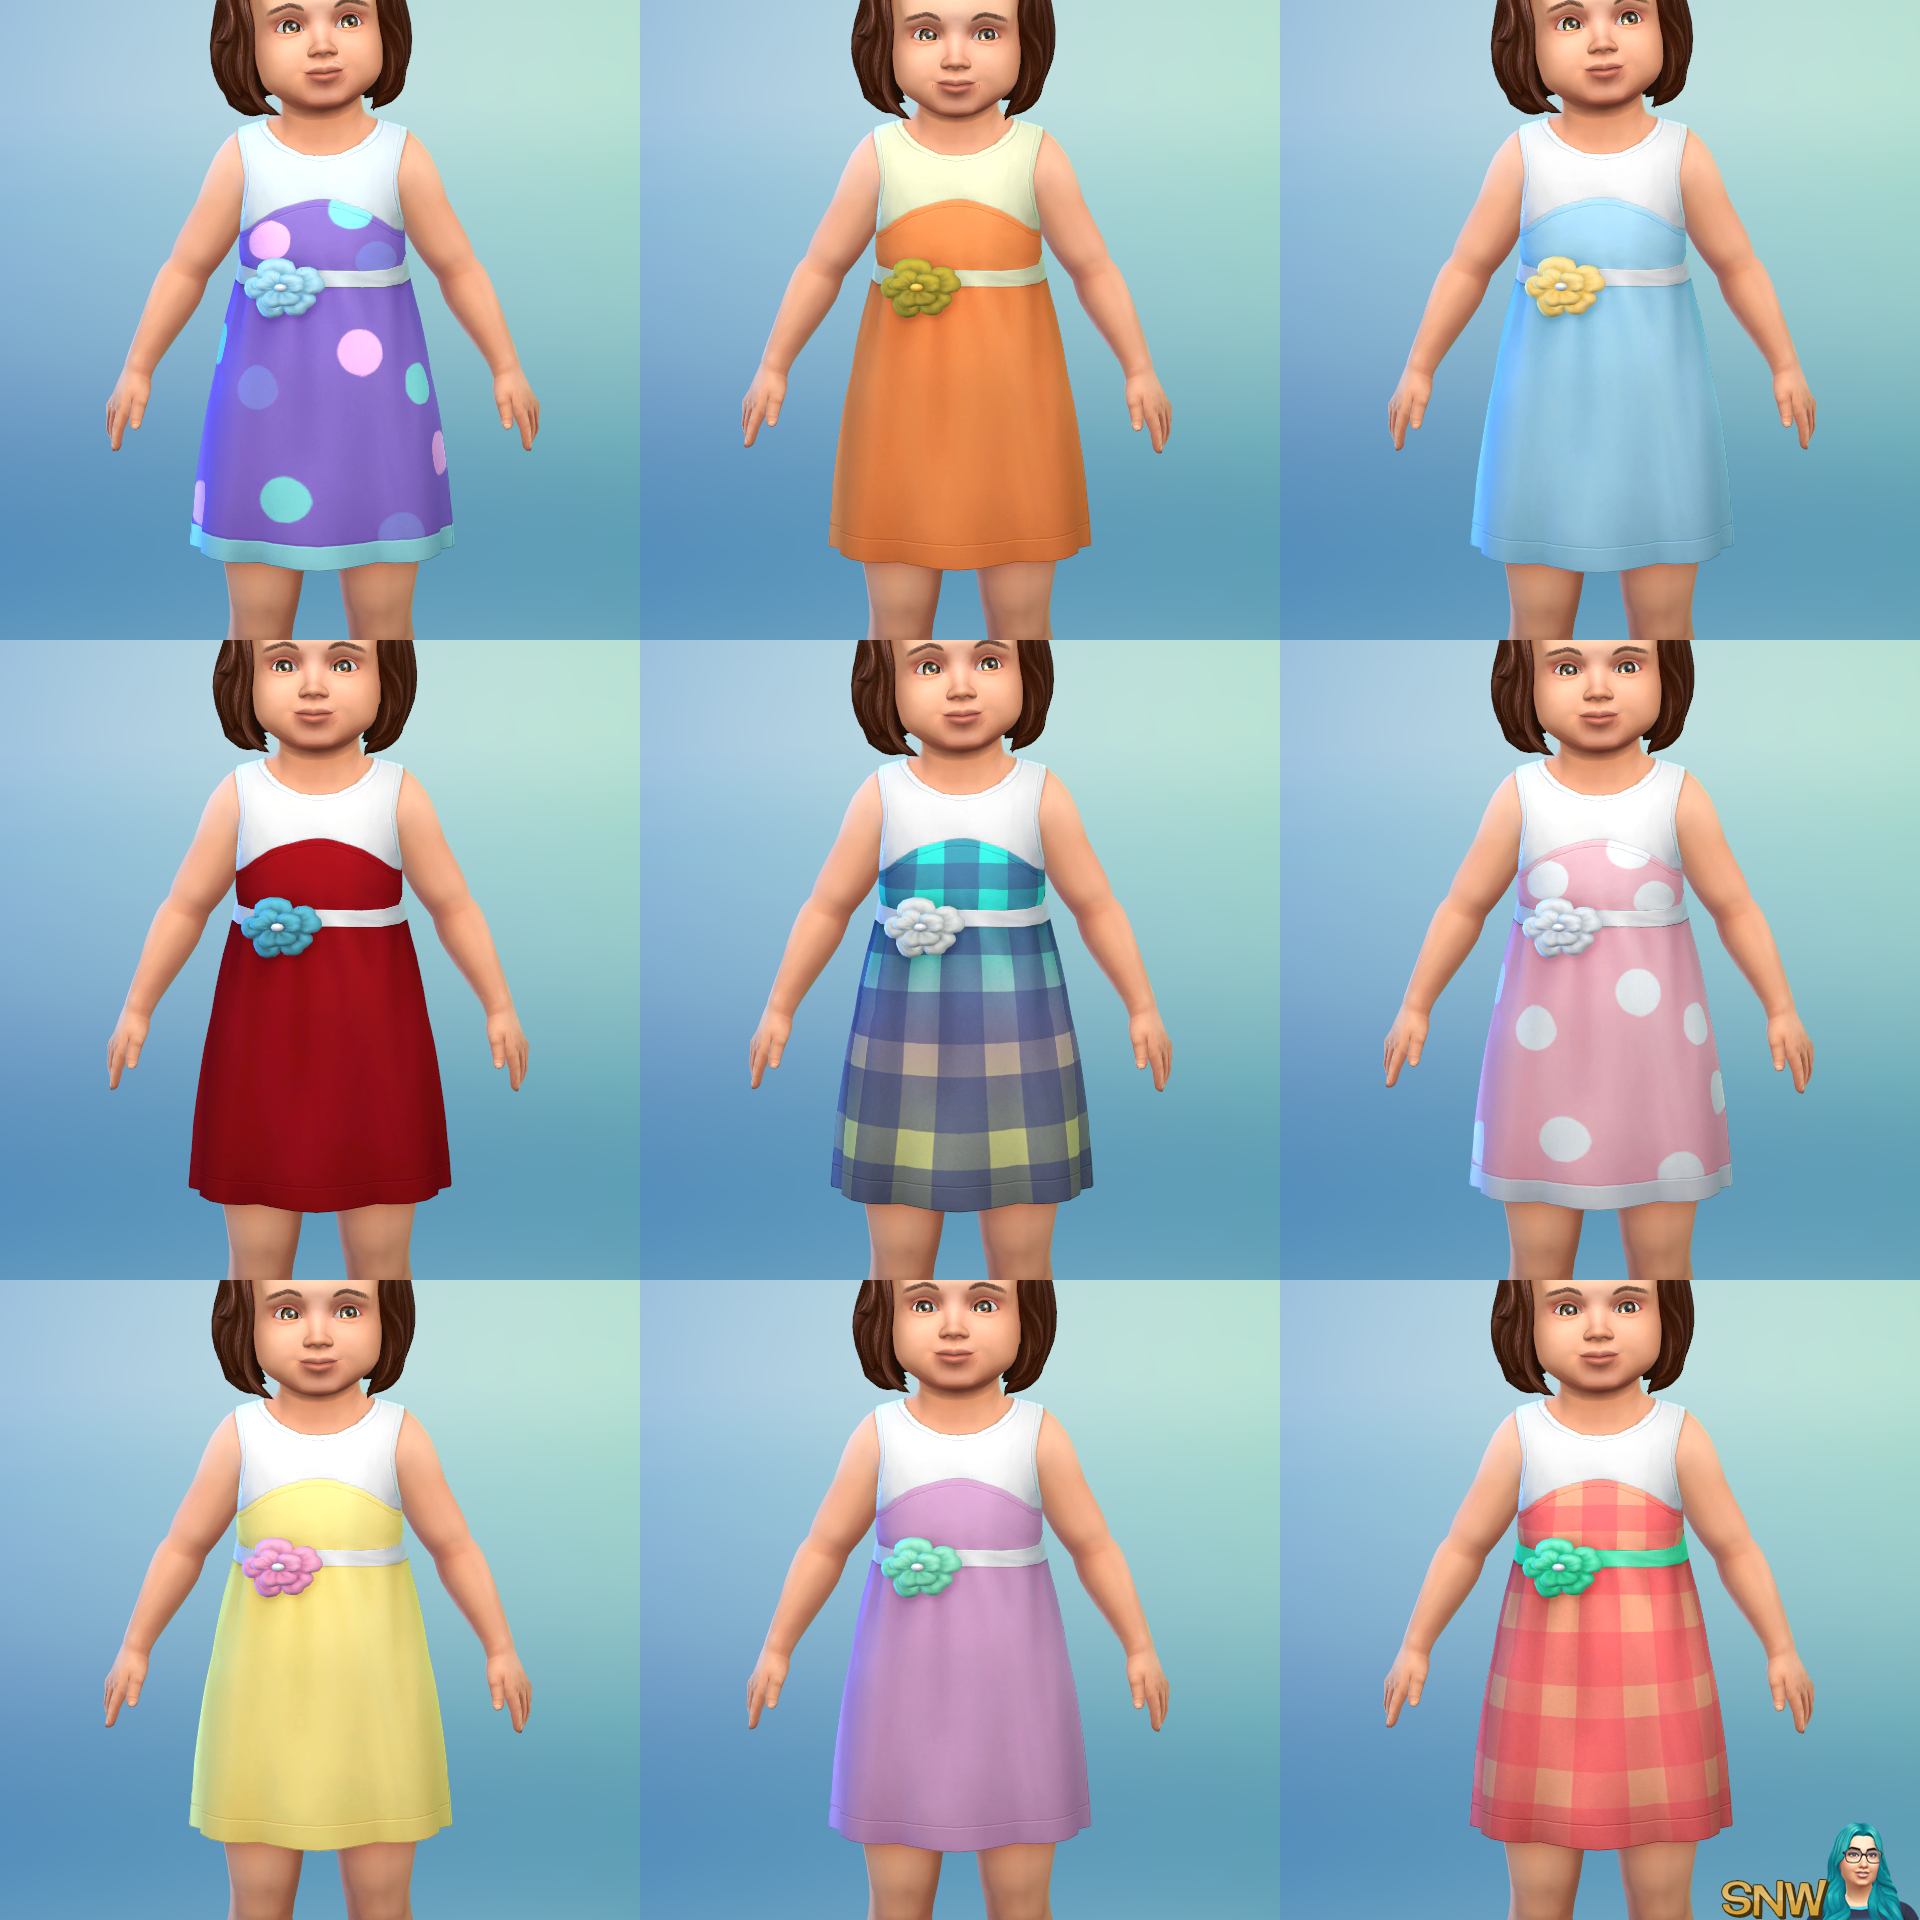 The Sims 4: Toddler Stuff - Blueprints, SNW